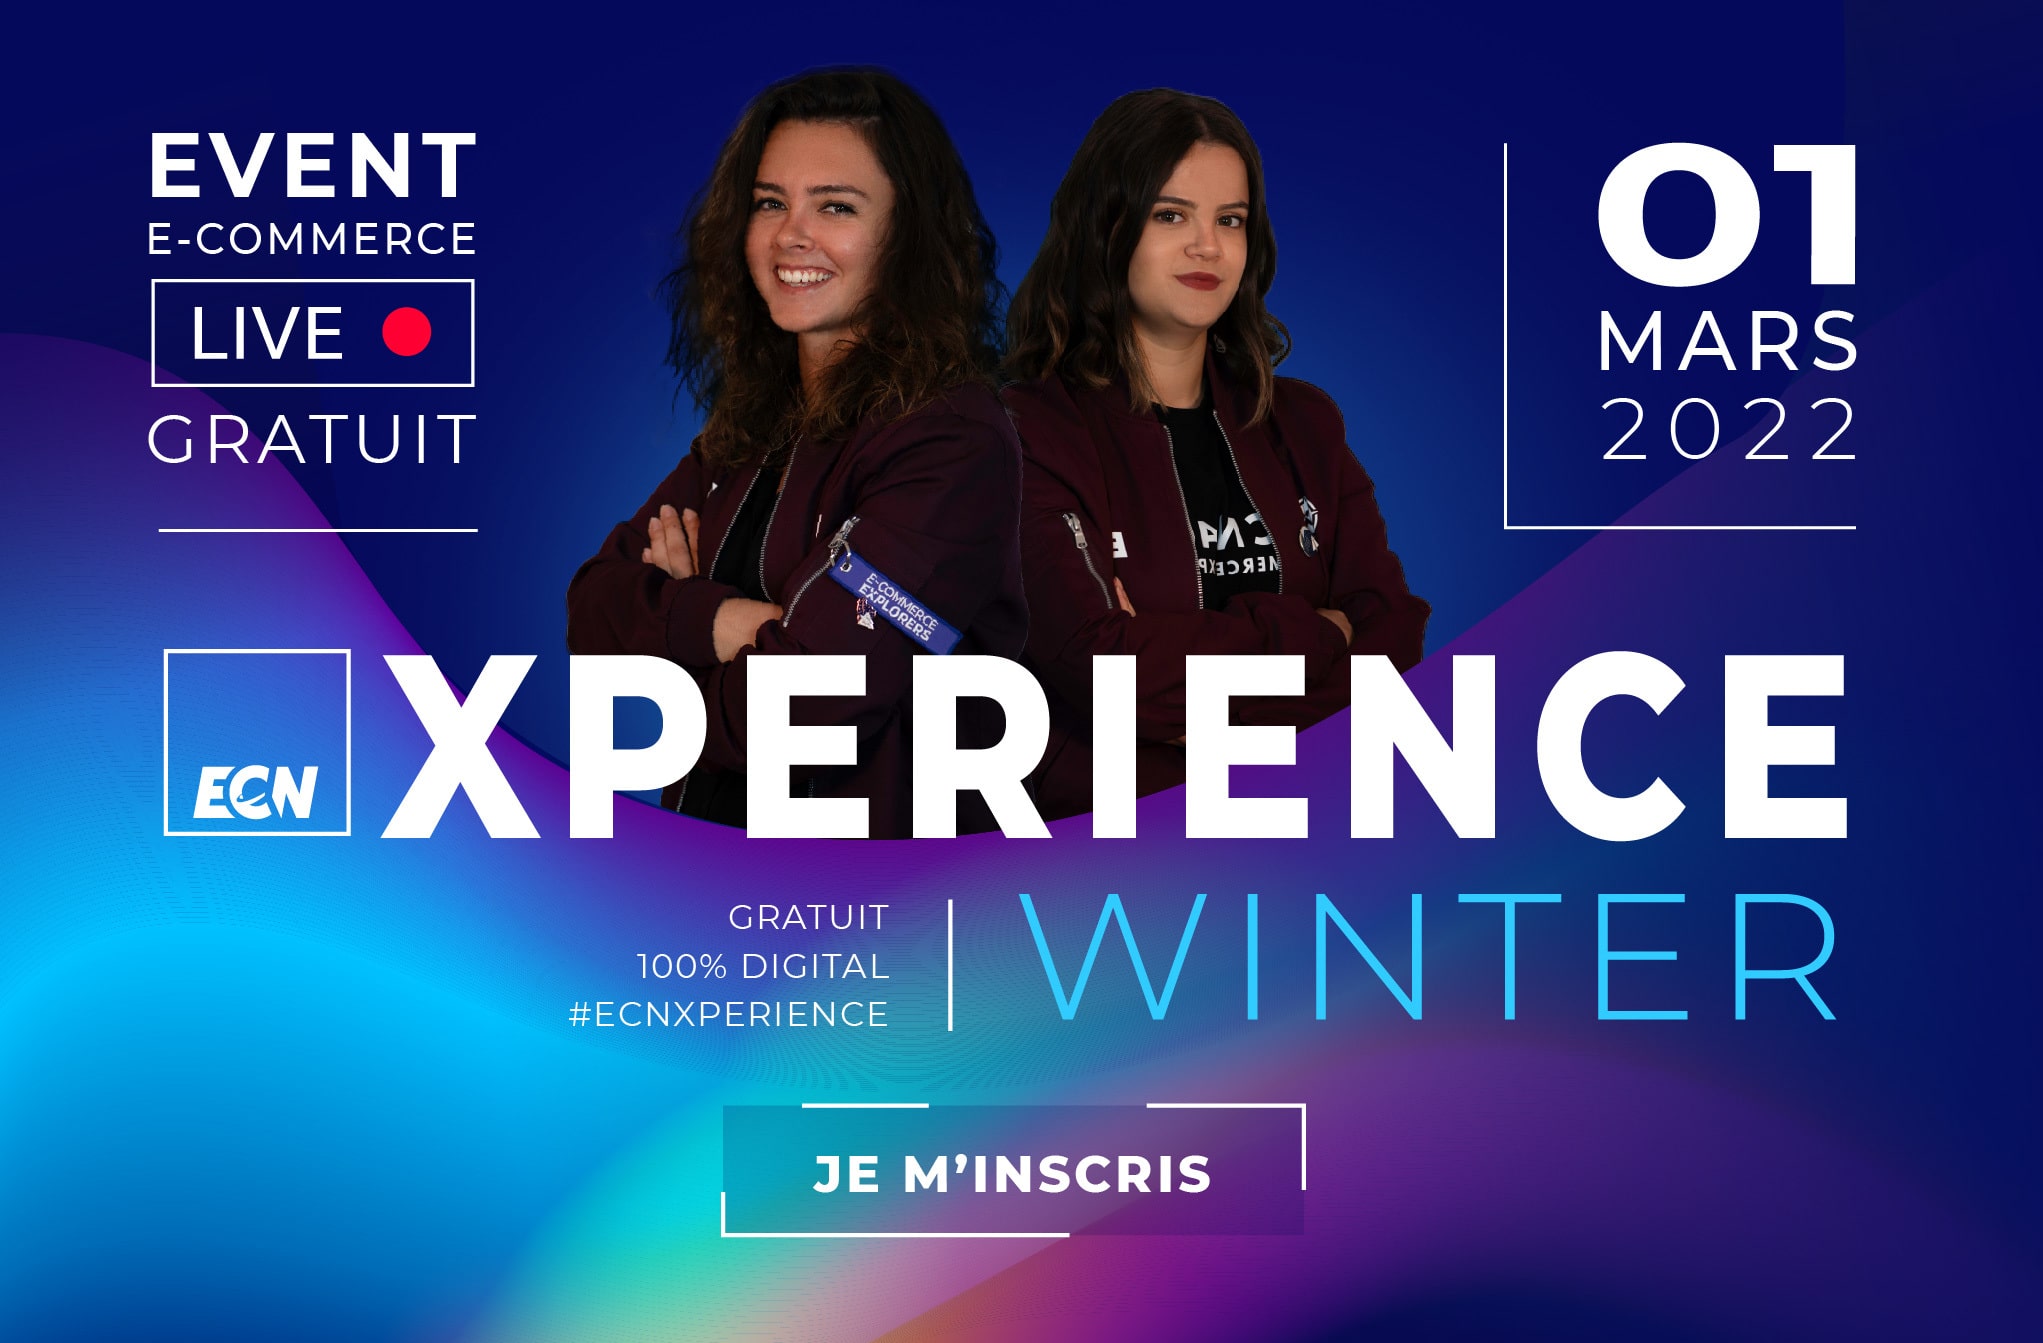 Xperience winter edition event ecommerce 1